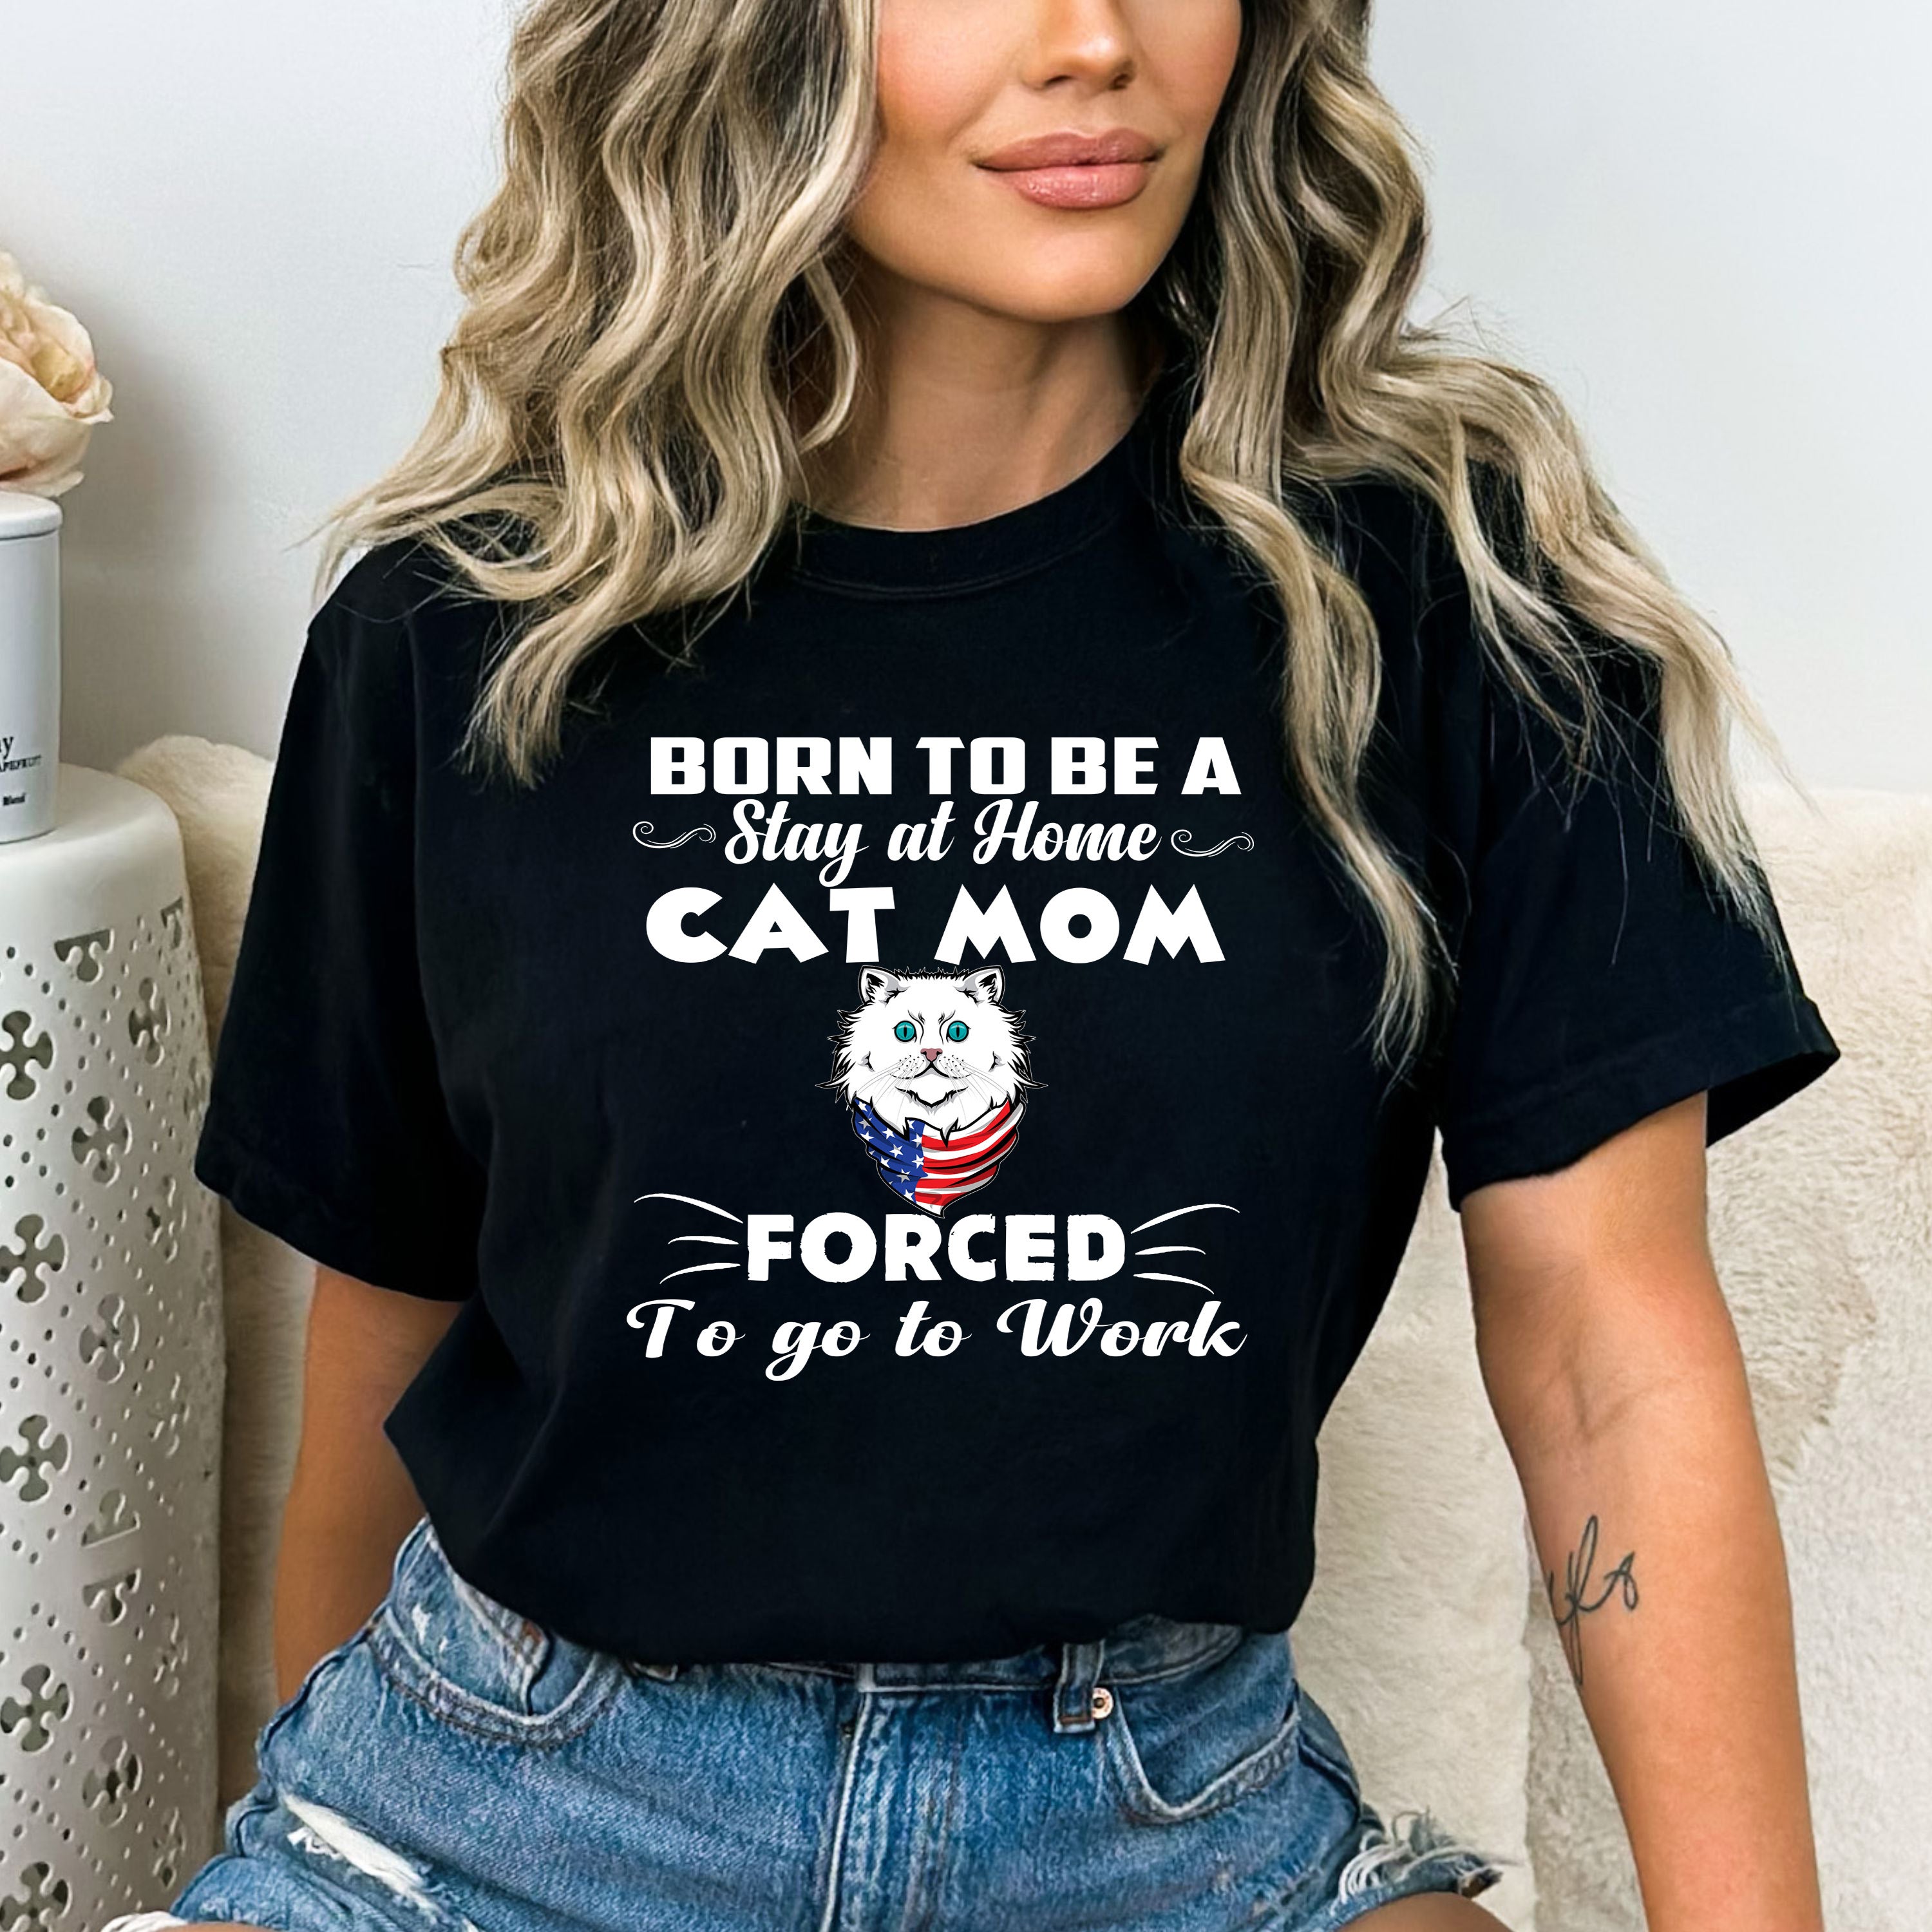 'BORN TO BE A STAY AT HOME CAT MOM" T-SHIRT.